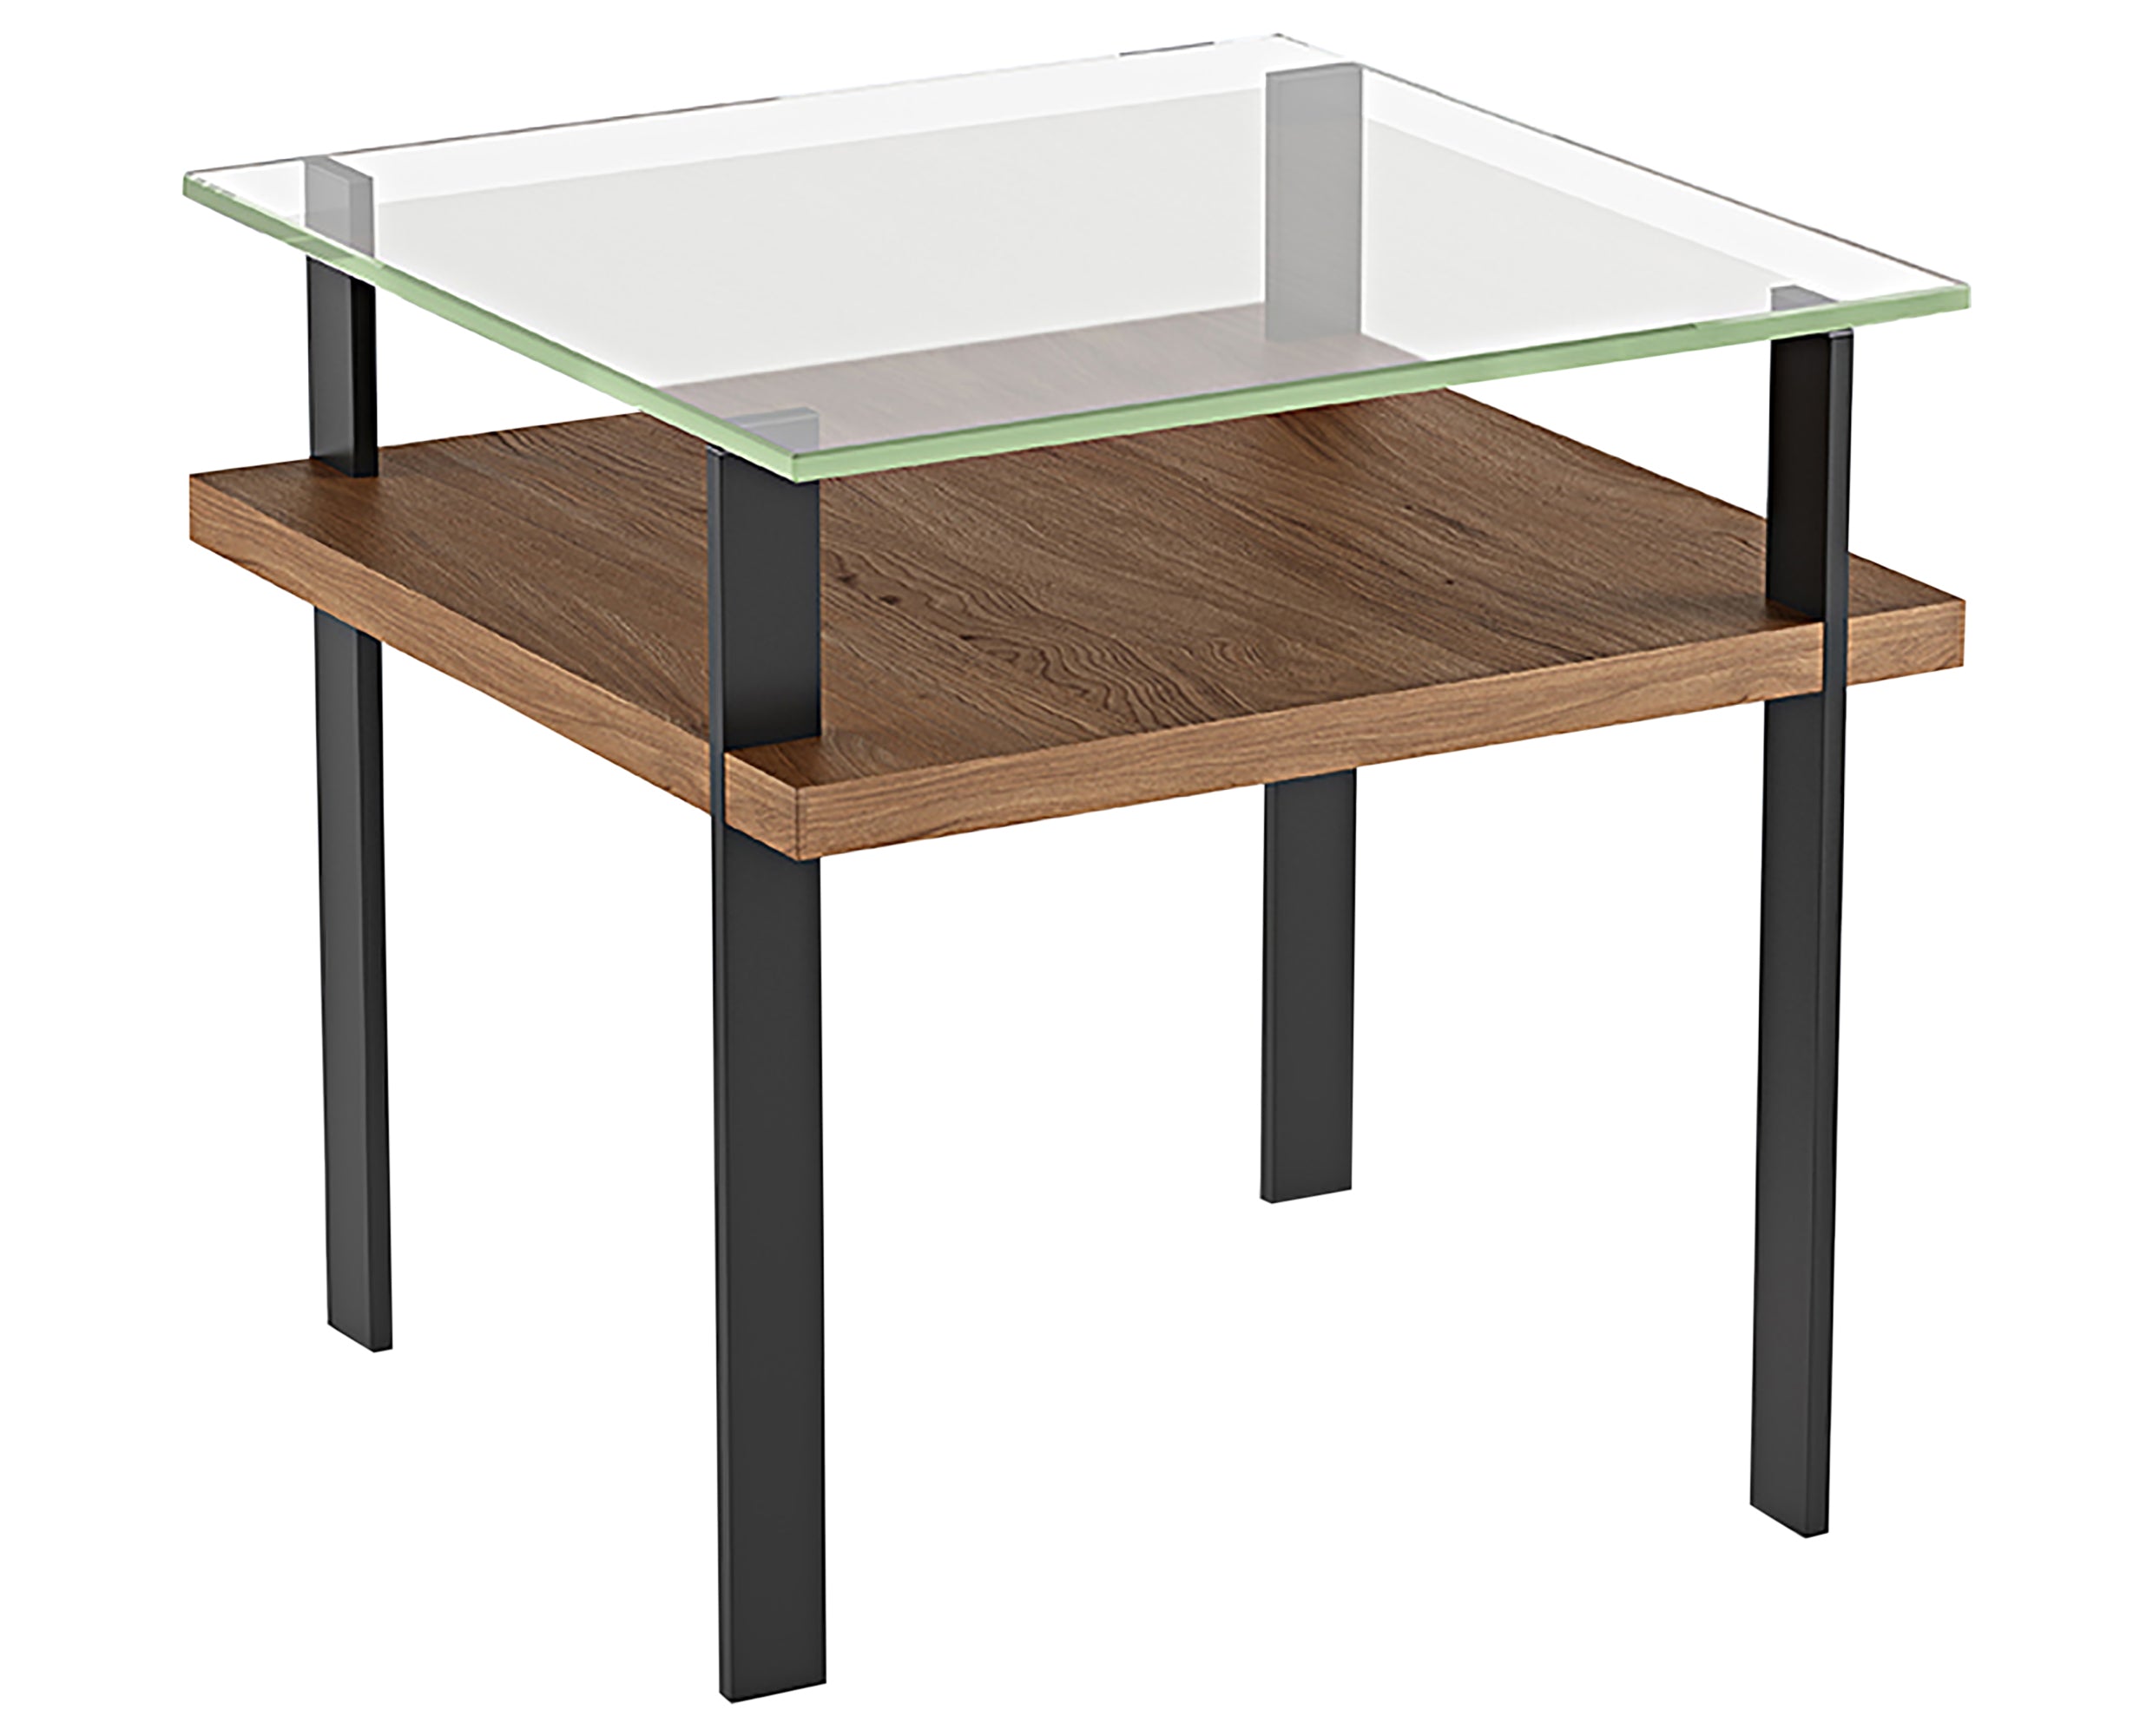 Natural Walnut Veneer &amp; Polished Tempered Glass with Black Aluminum | BDI Terrace End Table | Valley Ridge Furniture